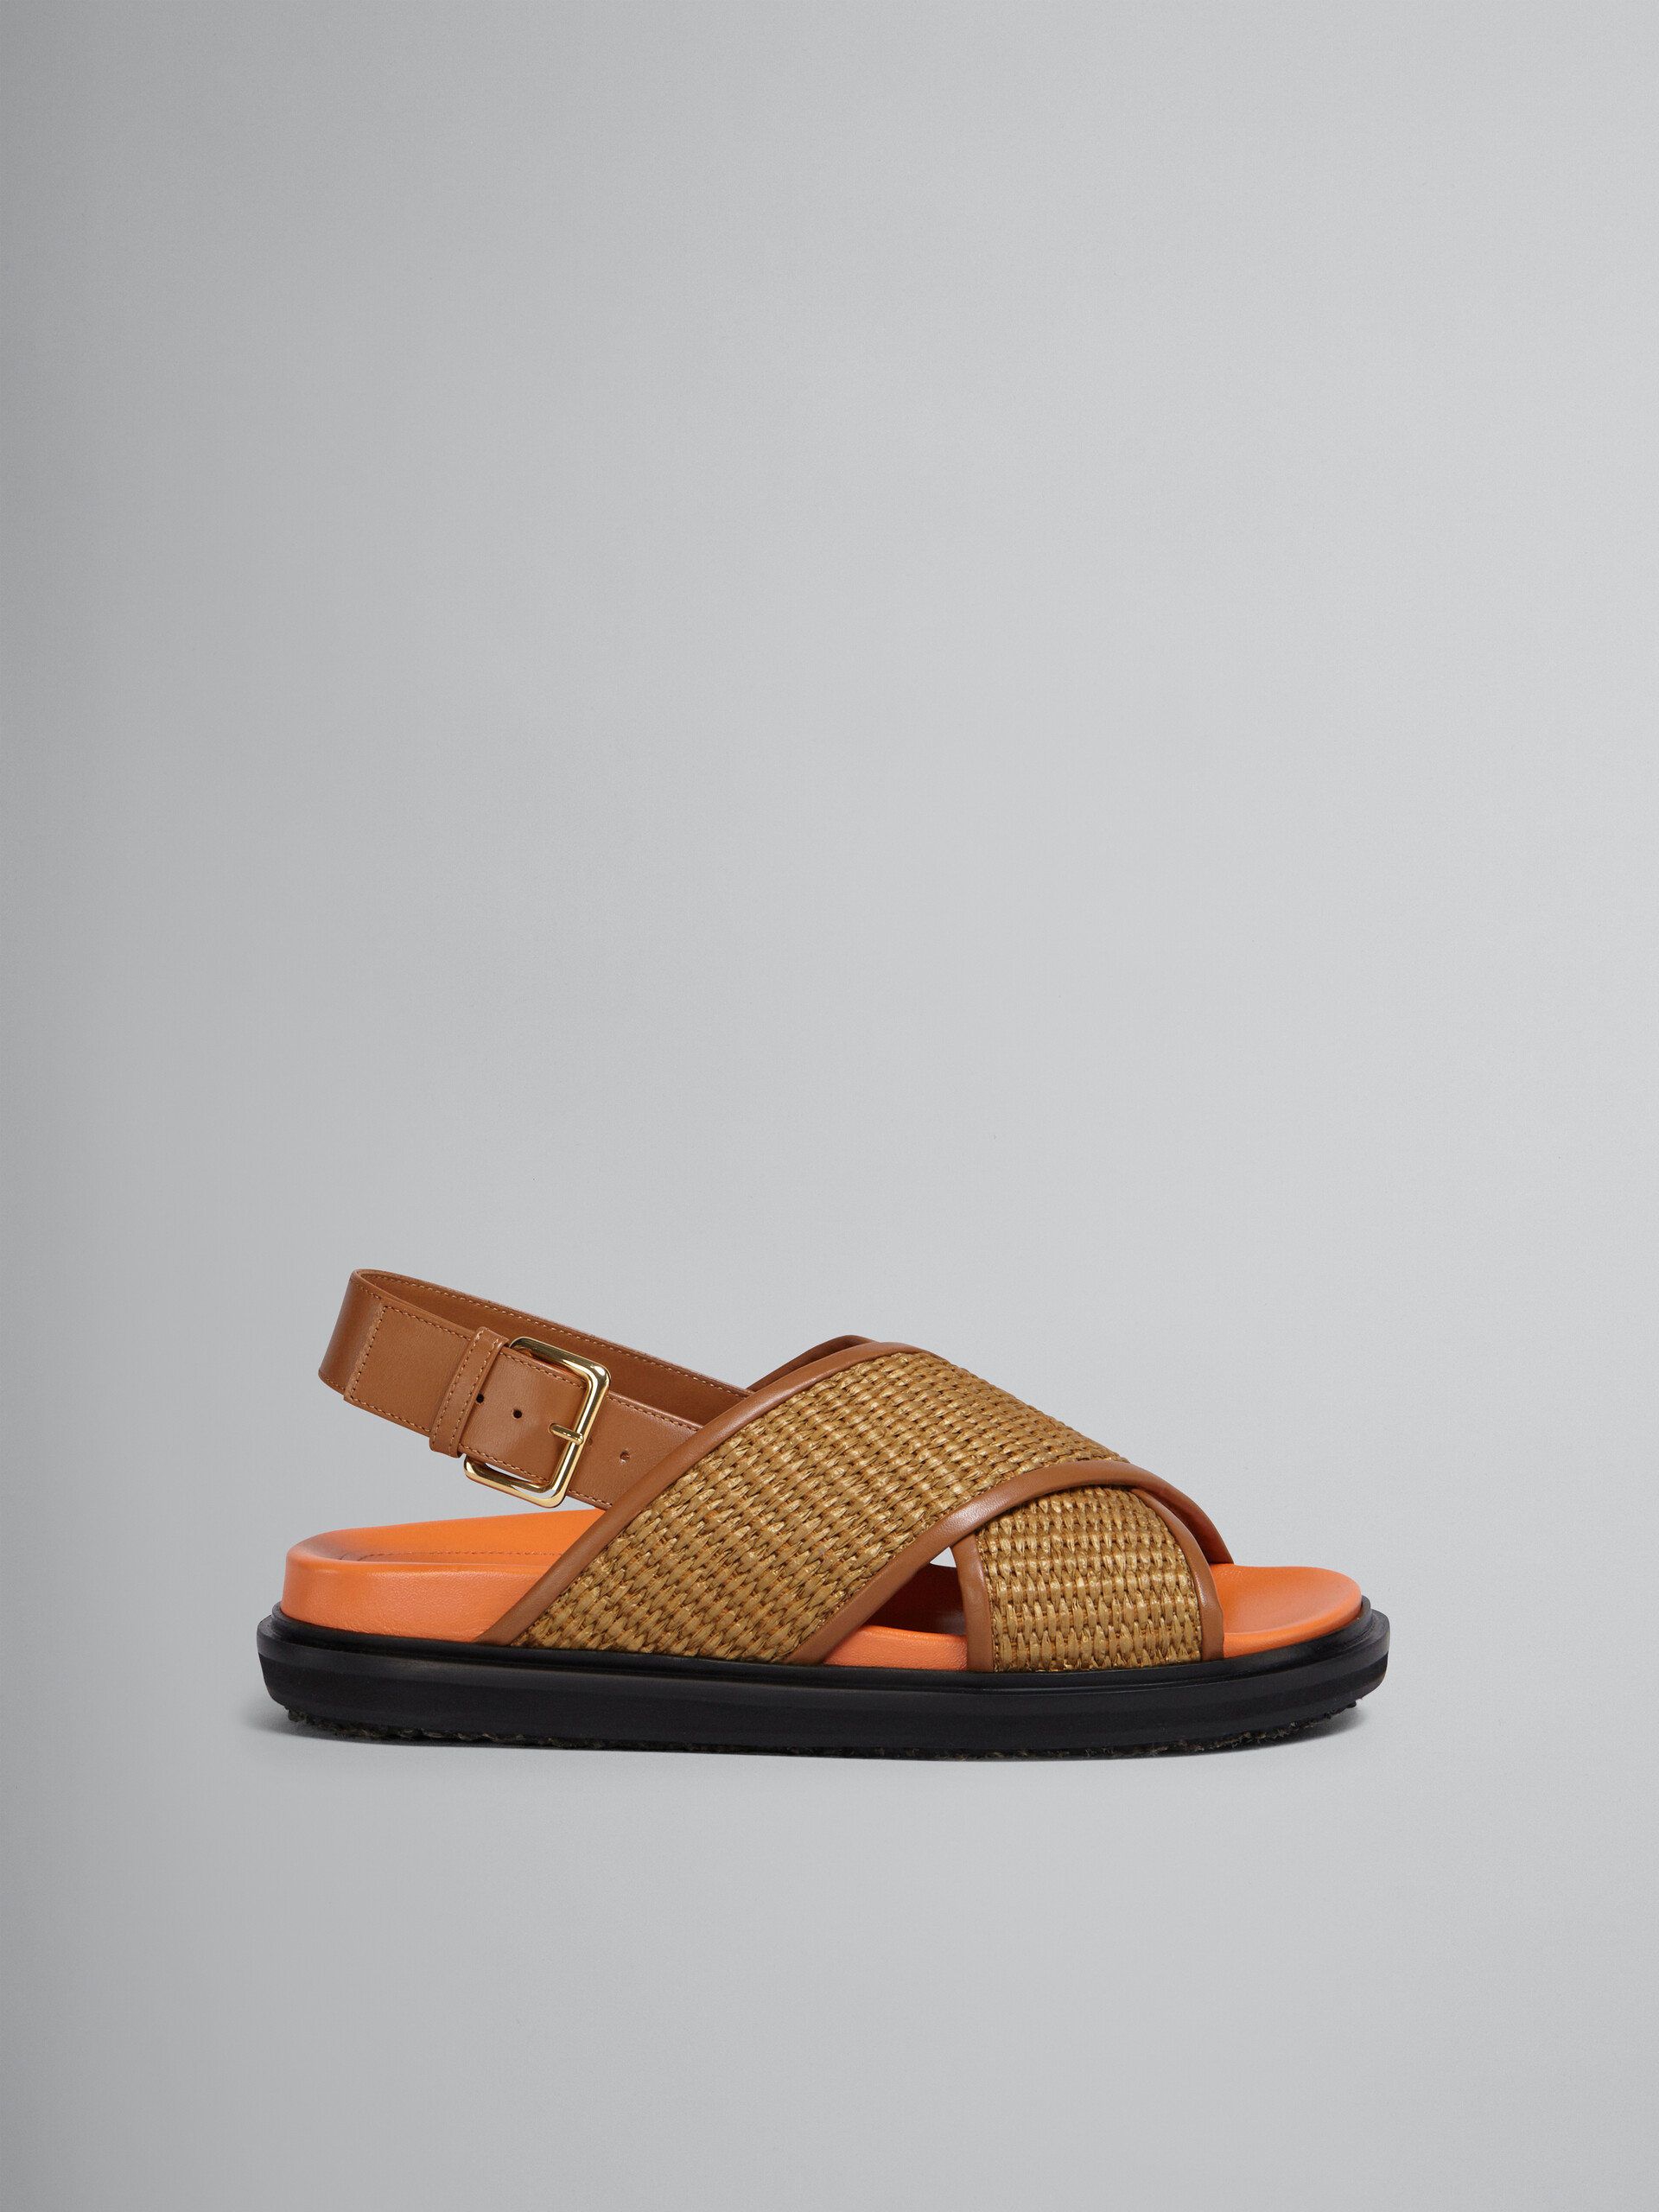 Fussbet sandals in brown leather and raffia-effect fabric - Sandals - Image 1